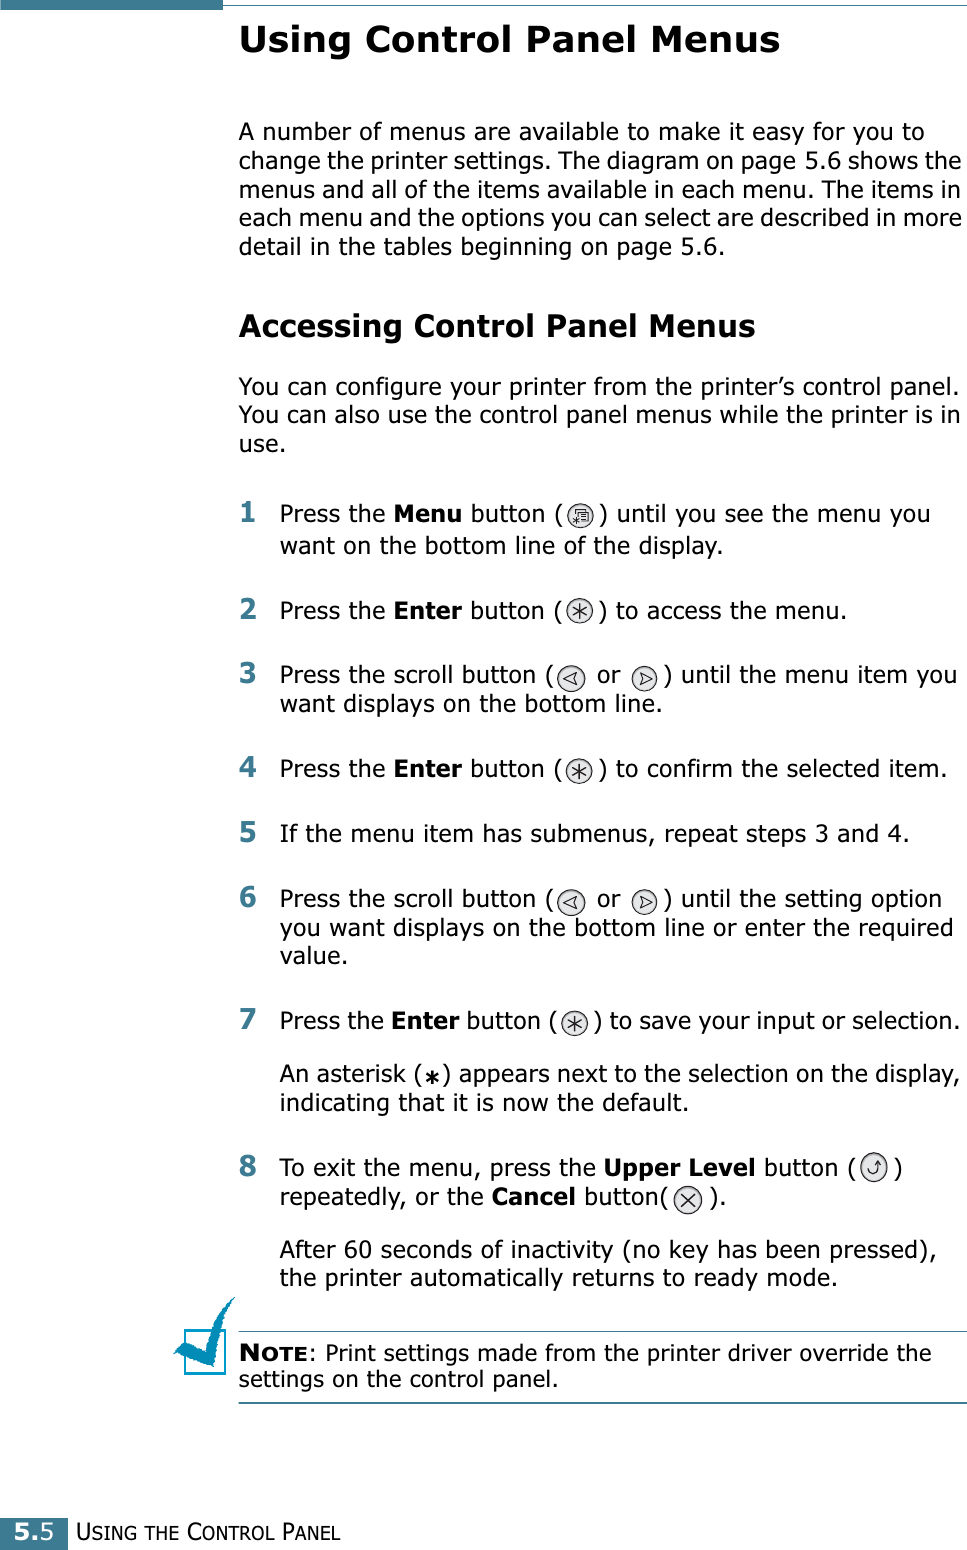 USING THE CONTROL PANEL5.5Using Control Panel MenusA number of menus are available to make it easy for you to change the printer settings. The diagram on page 5.6 shows the menus and all of the items available in each menu. The items in each menu and the options you can select are described in more detail in the tables beginning on page 5.6.Accessing Control Panel MenusYou can configure your printer from the printer’s control panel. You can also use the control panel menus while the printer is in use.1Press the Menu button ( ) until you see the menu you want on the bottom line of the display.2Press the Enter button ( ) to access the menu.3Press the scroll button (  or  ) until the menu item you want displays on the bottom line.4Press the Enter button ( ) to confirm the selected item. 5If the menu item has submenus, repeat steps 3 and 4.6Press the scroll button (  or  ) until the setting option you want displays on the bottom line or enter the required value.7Press the Enter button ( ) to save your input or selection. An asterisk (*) appears next to the selection on the display, indicating that it is now the default.8To exit the menu, press the Upper Level button ( ) repeatedly, or the Cancel button( ).After 60 seconds of inactivity (no key has been pressed), the printer automatically returns to ready mode.NOTE: Print settings made from the printer driver override the settings on the control panel.